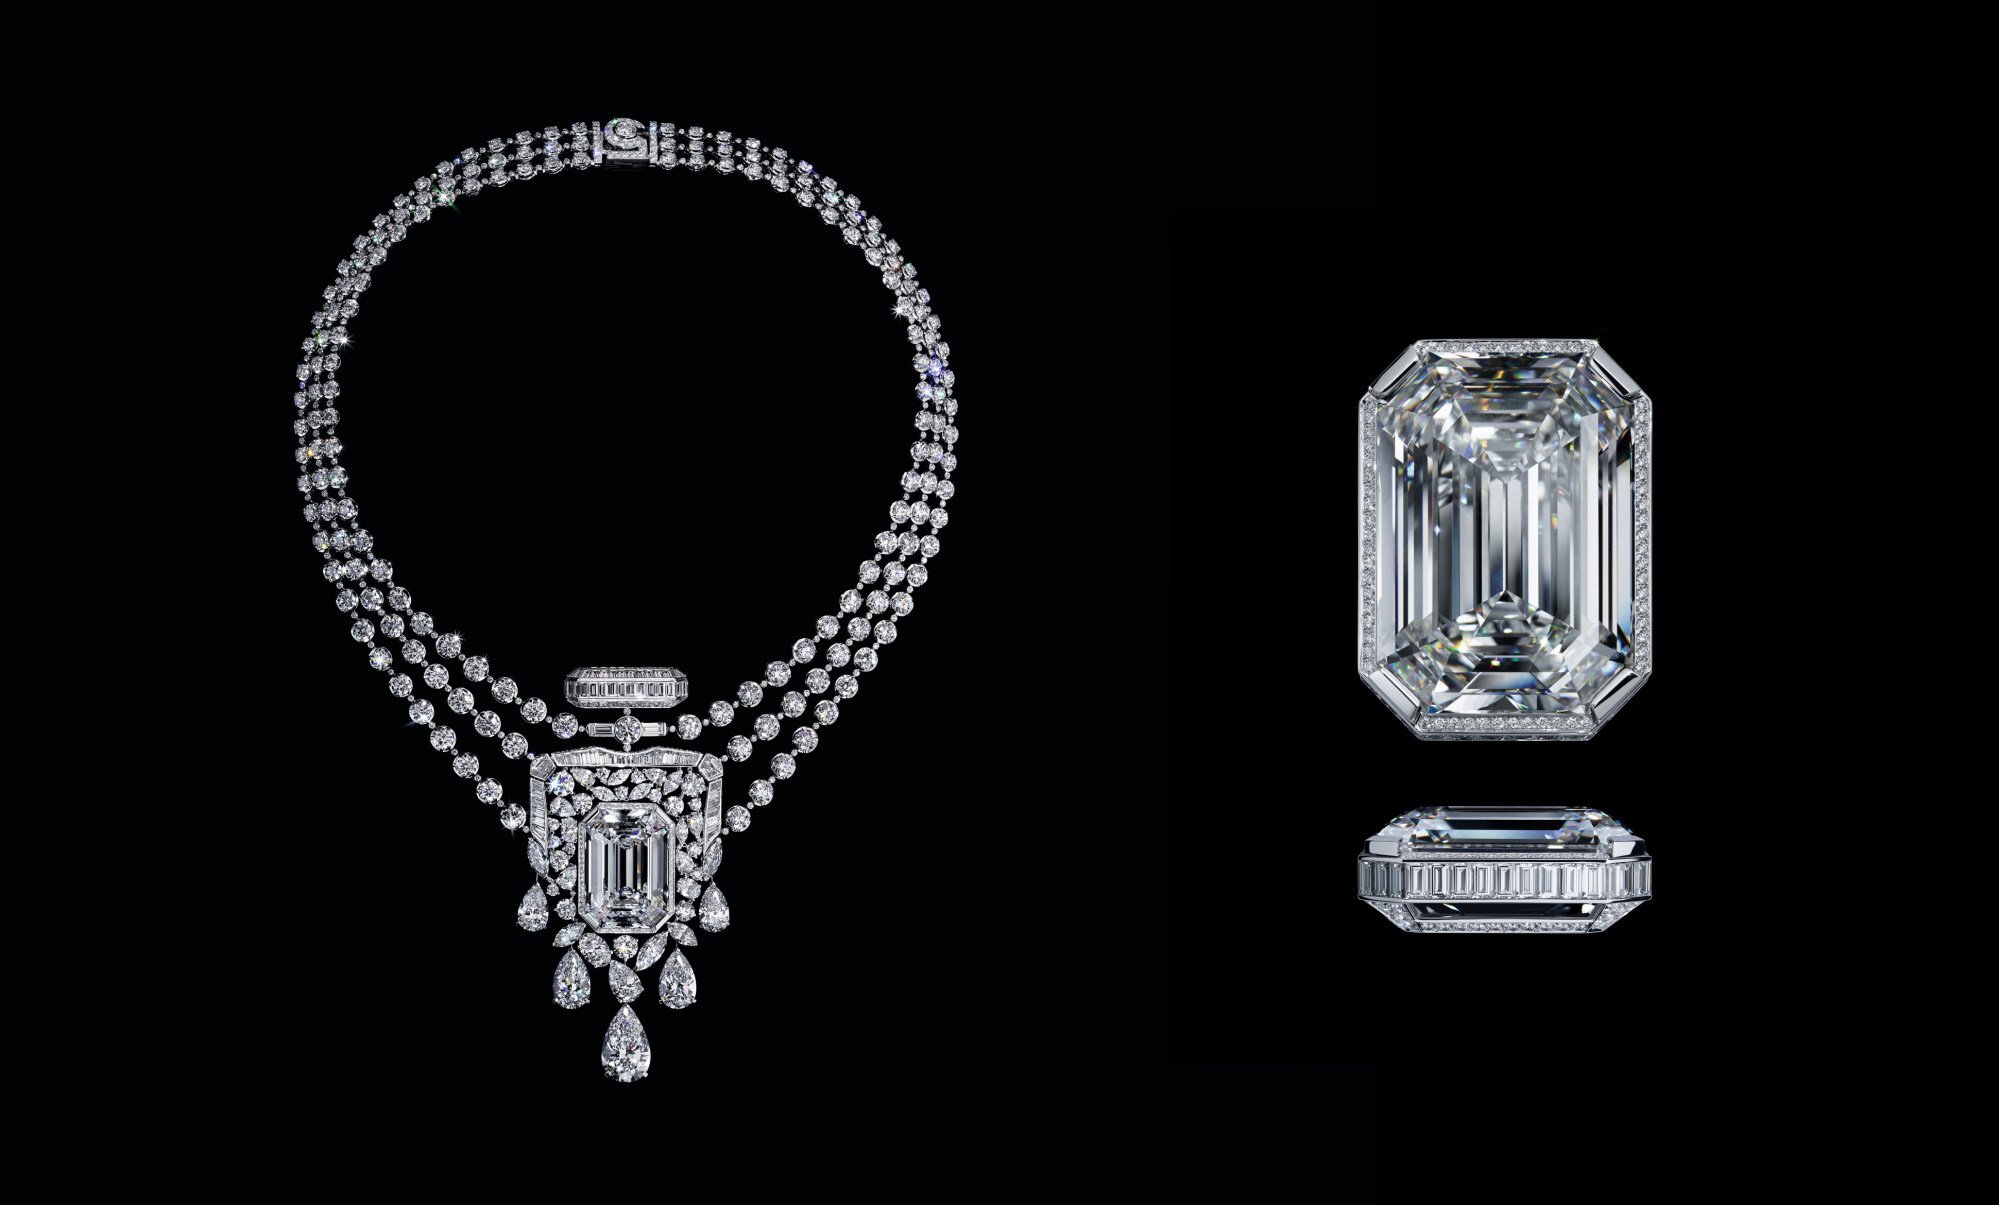 From Chanel No. 5 to the 55.55 high jewellery diamond necklace: CEO ...